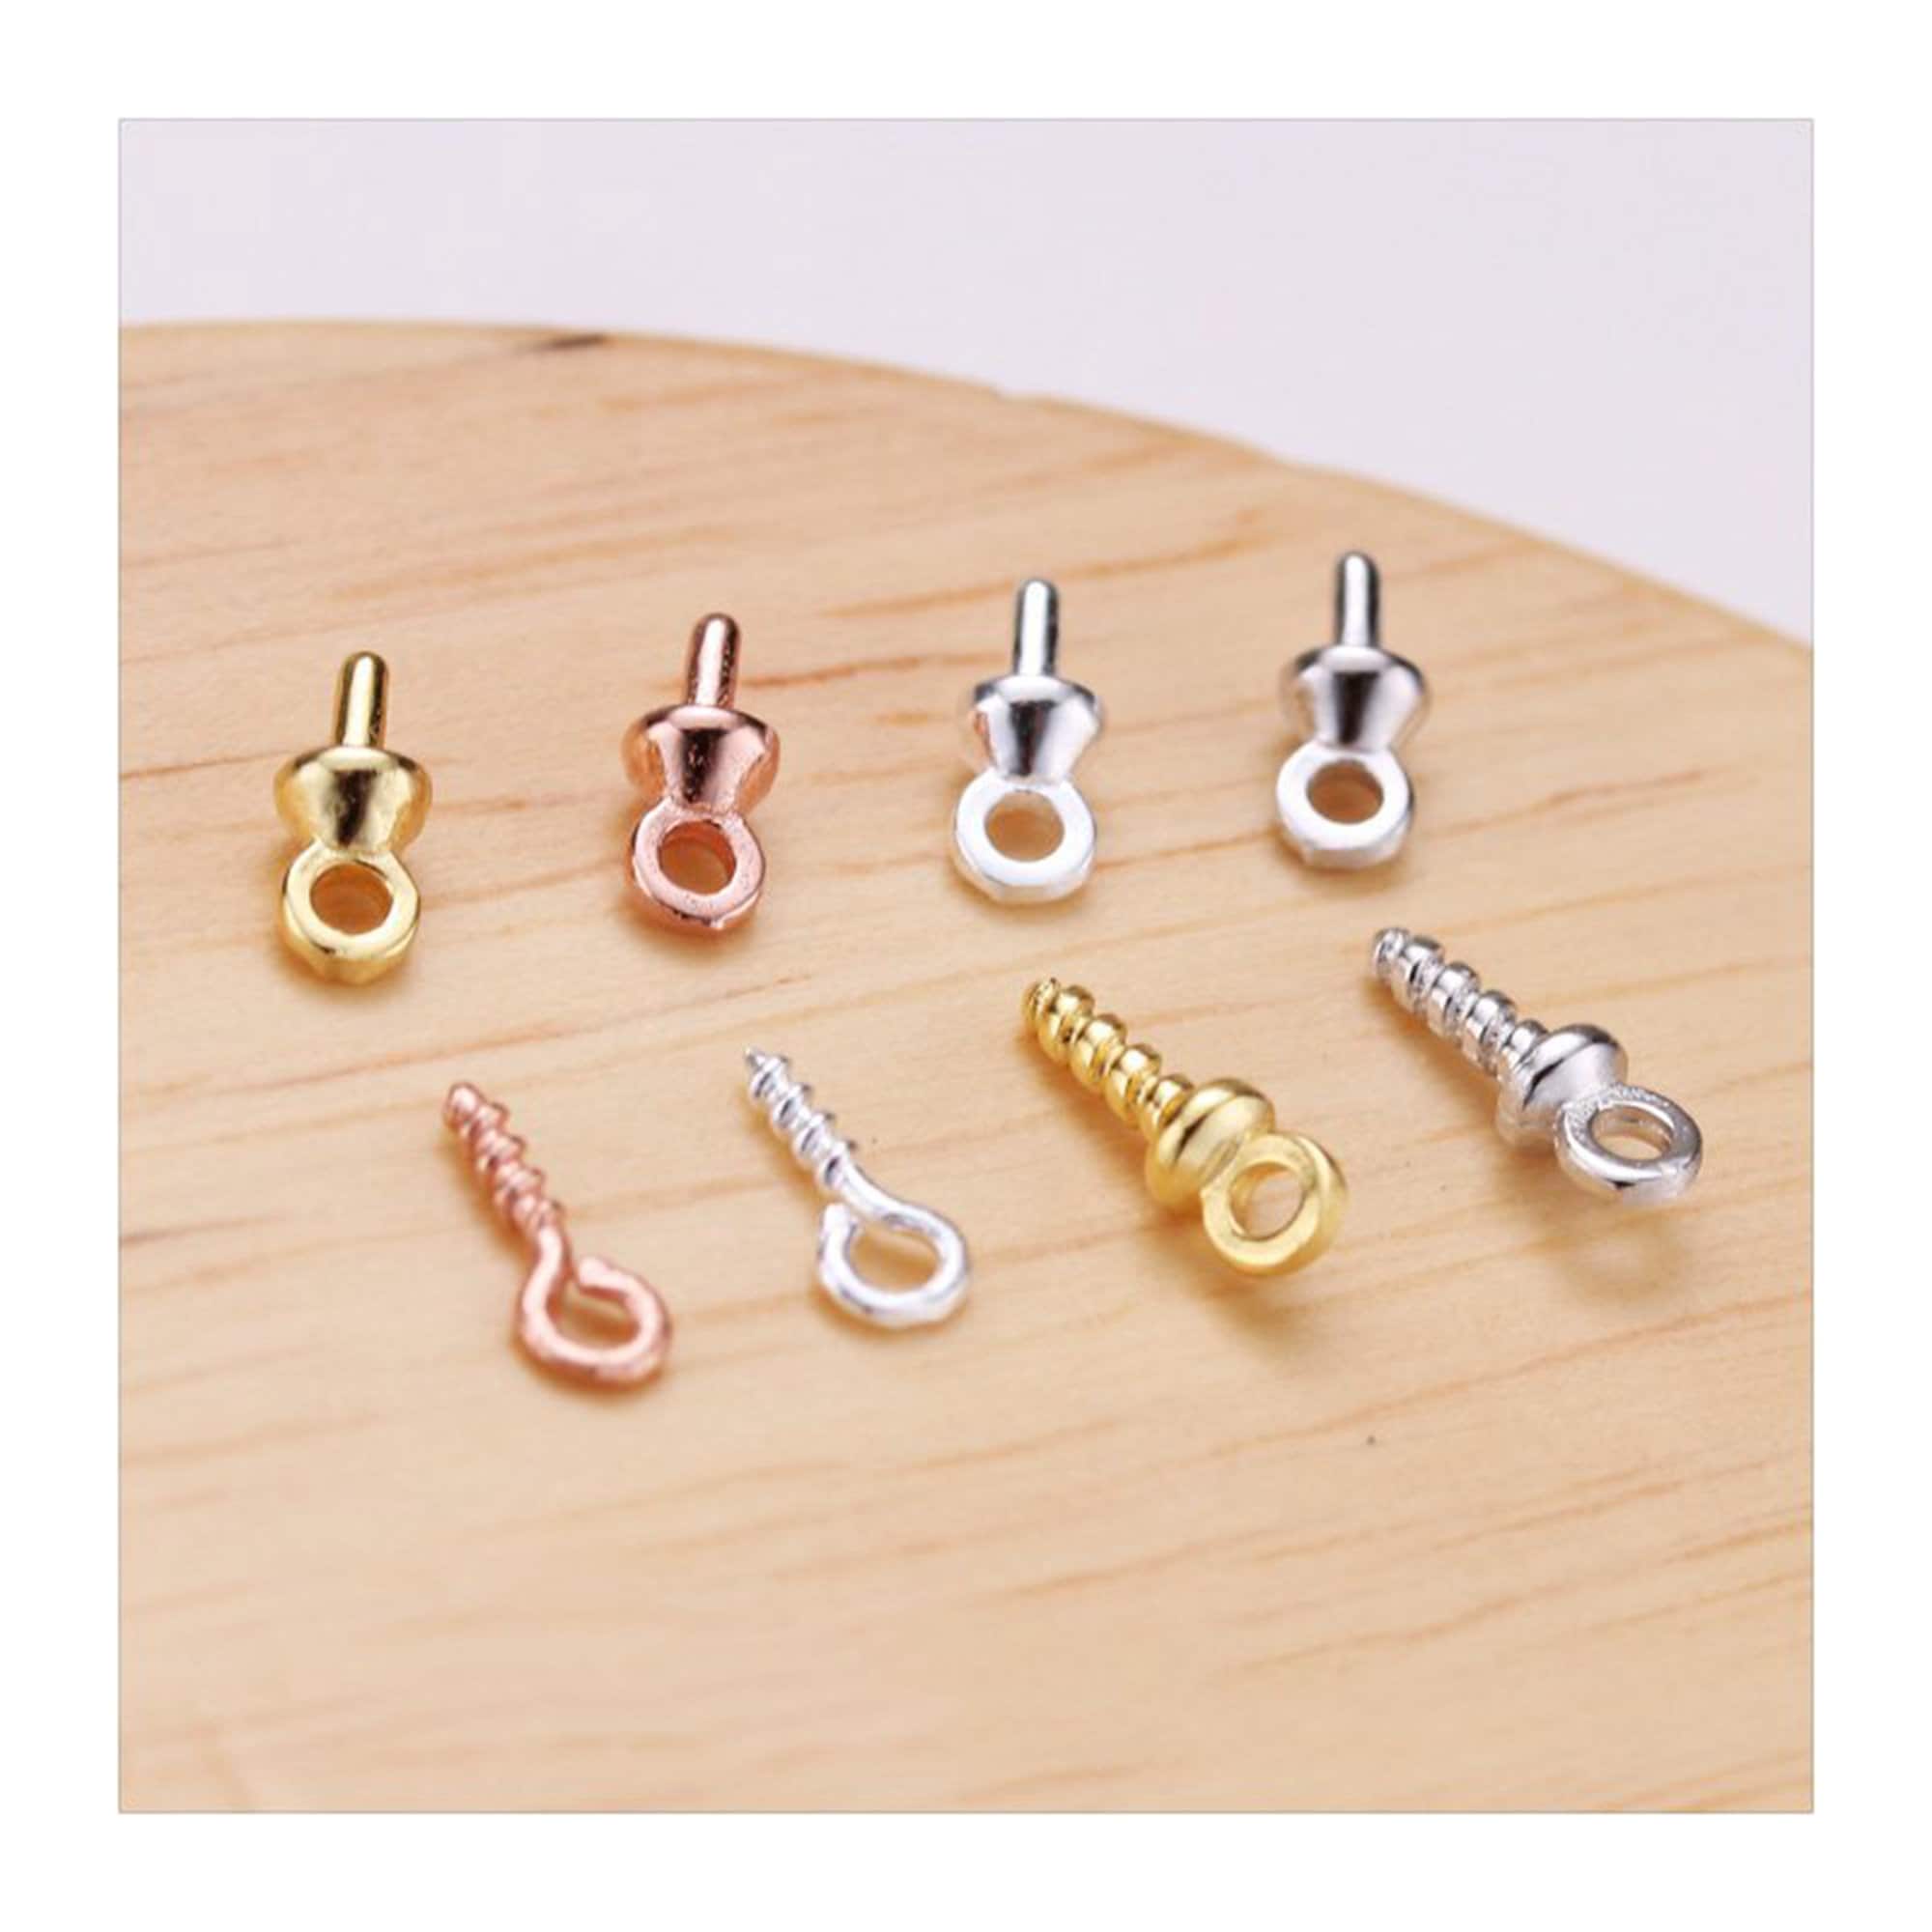 300pcs Screw Eye Pins Hooks, Small Metal Hoop Eye Pin Screws for DIY  Jewelry, Charm Bead Pieces/ Arts & Crafts Projects/ Cork Top Bottles/ Charm  Bead